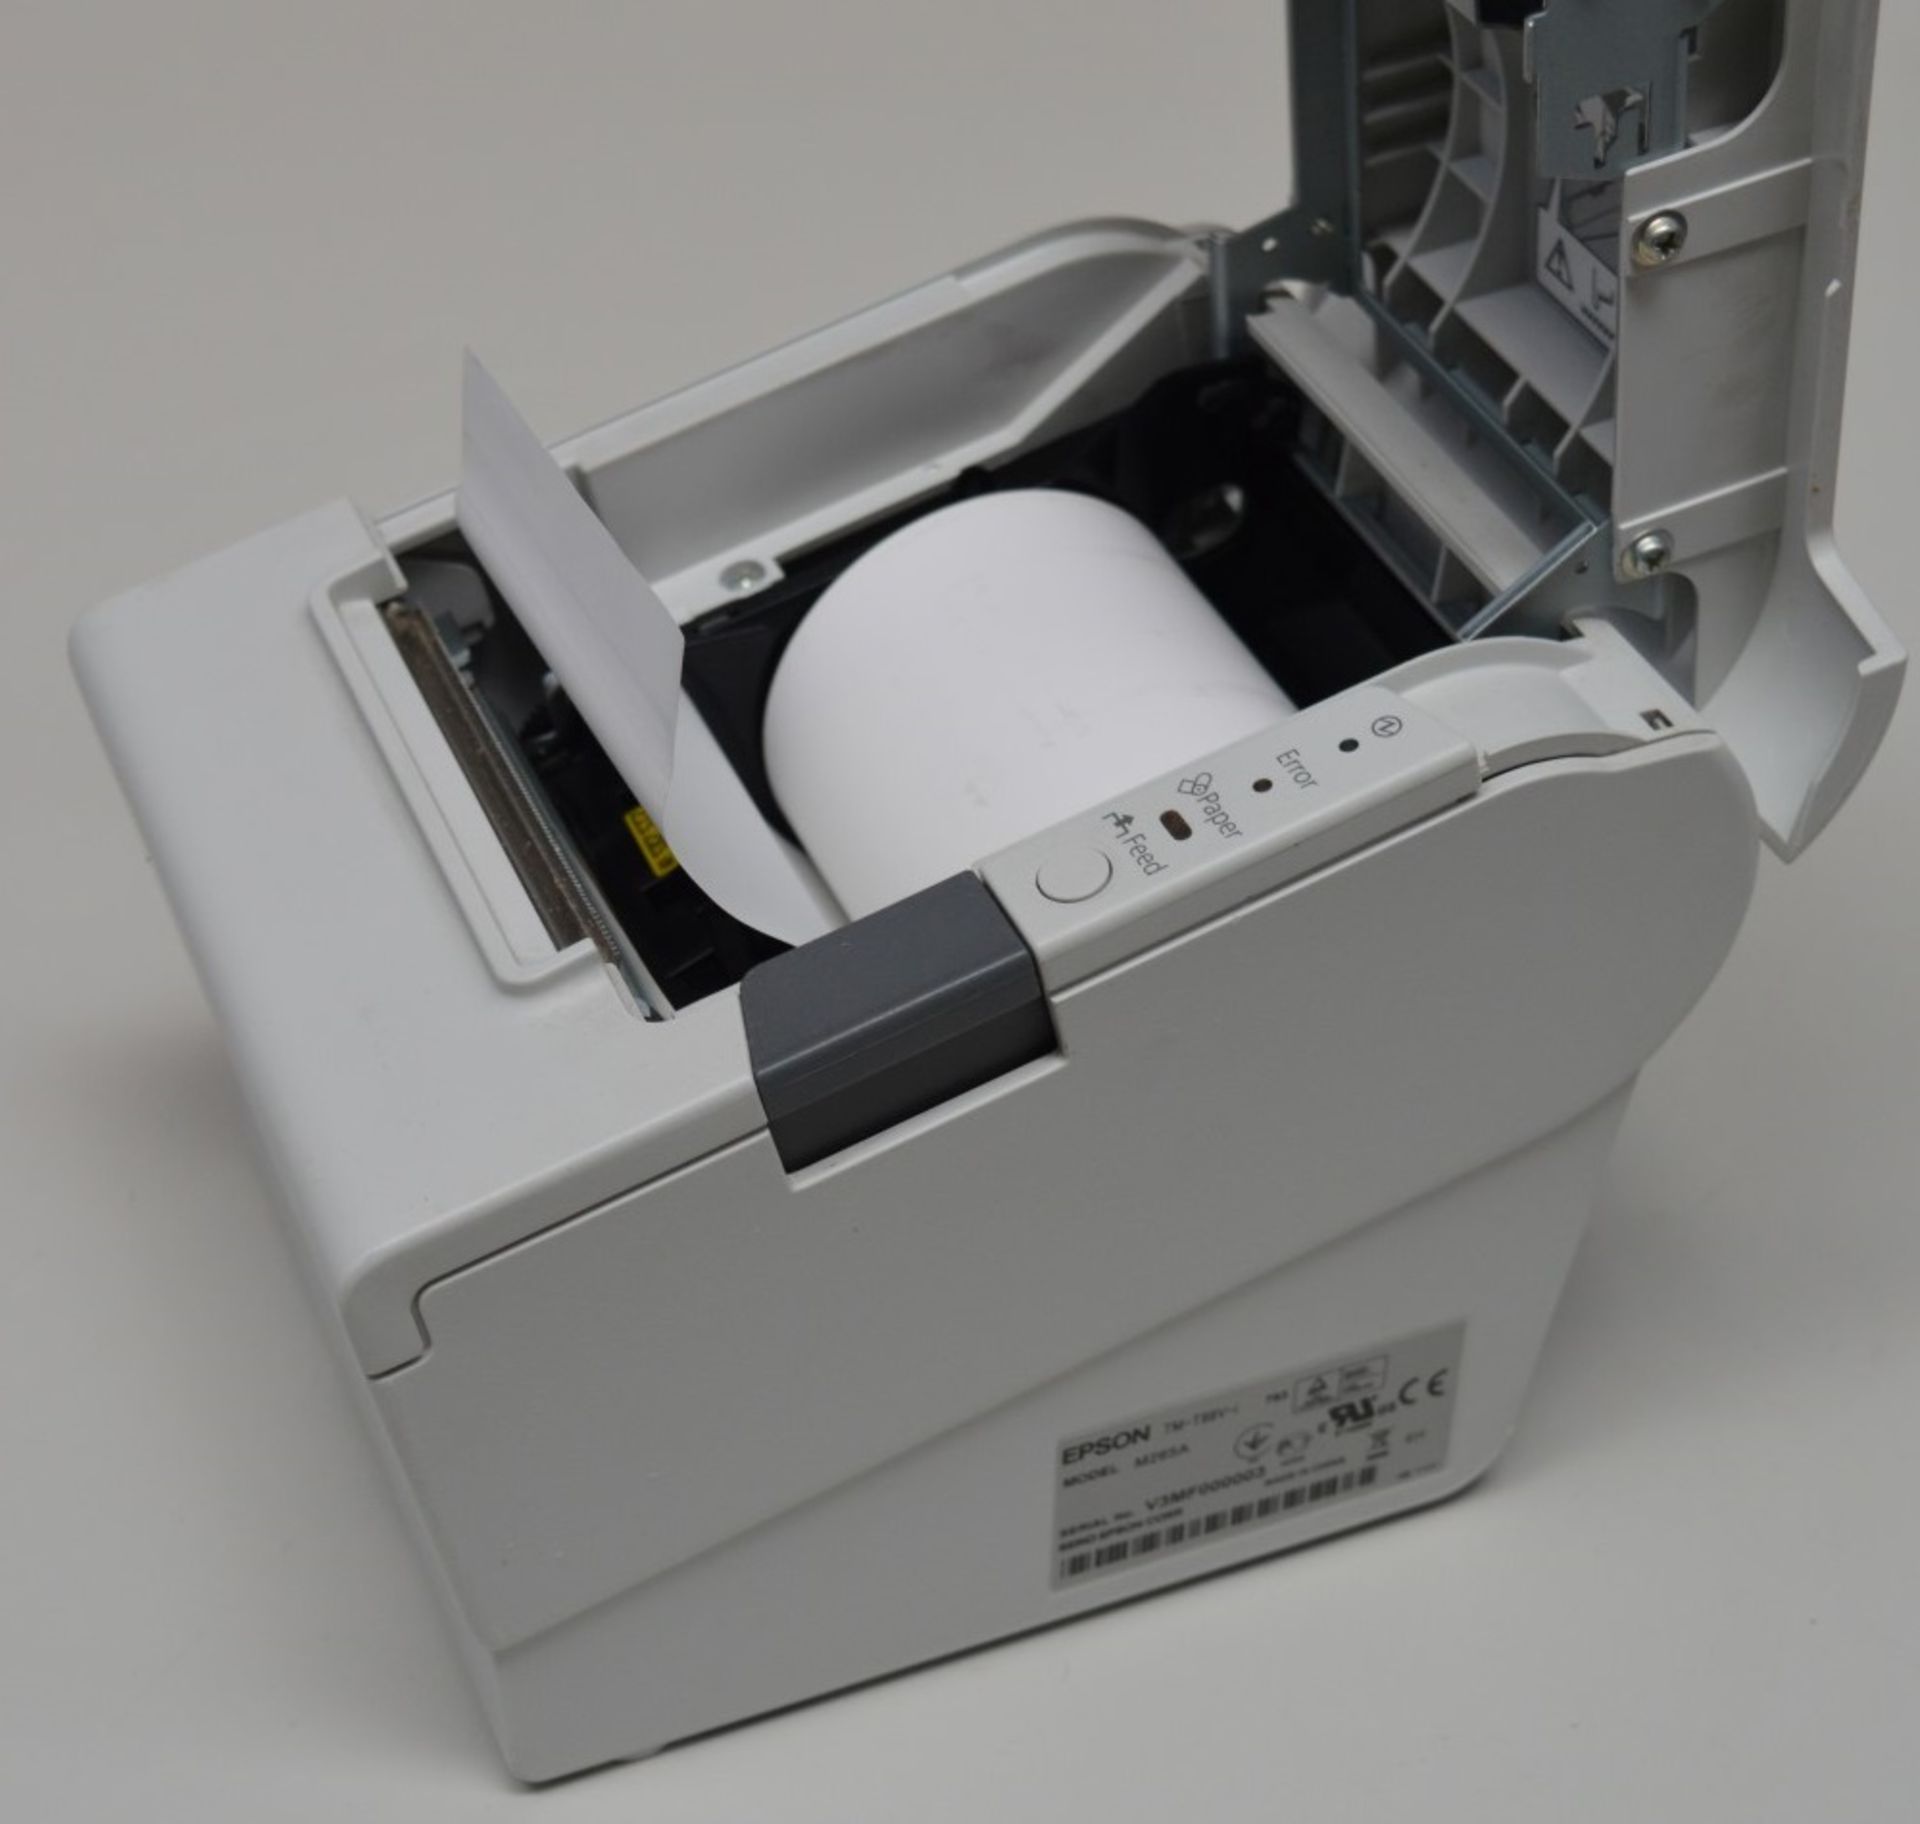 1 x Epson TM-T88VI Intelligent Thermal Receipt Printer - CL164 - Ref CAT023 - RRP Approx £400 - - Image 9 of 10